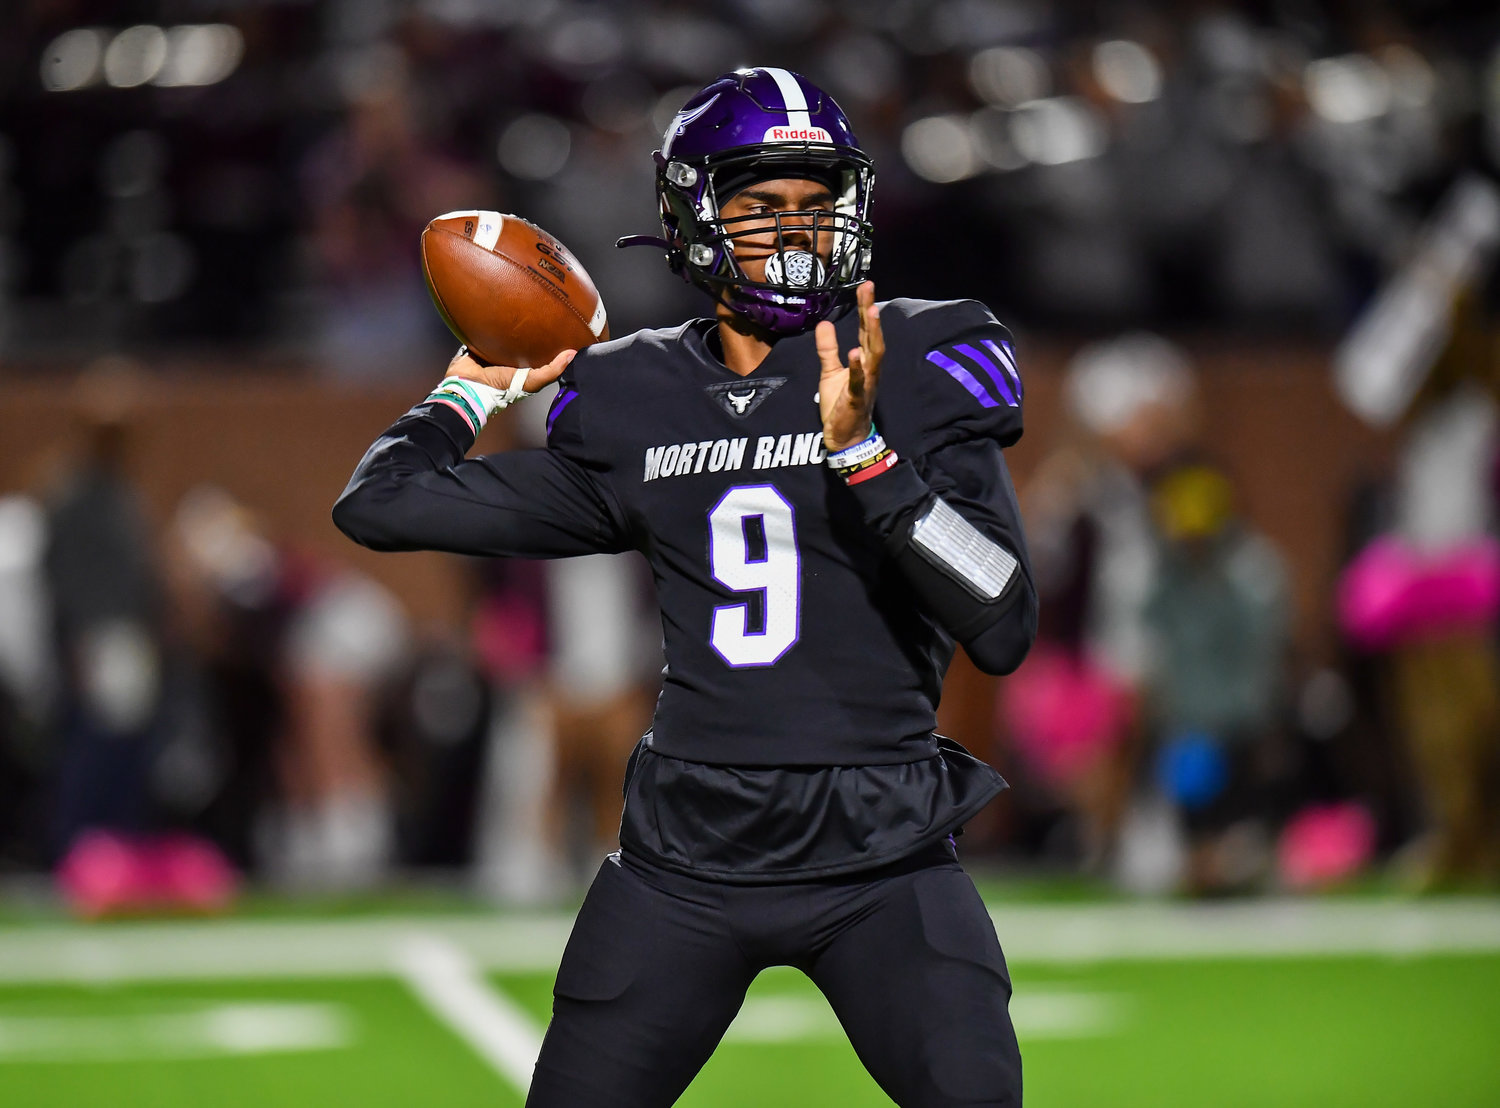 Katy, Tx. Oct. 29, 2021: Morton Ranch's QB Joshua Johnson #9 delivers a pass during a conference game between Cinco Ranch and Morton Ranch at Rhodes Stadium in Katy. (Photo by Mark Goodman / Katy Times)